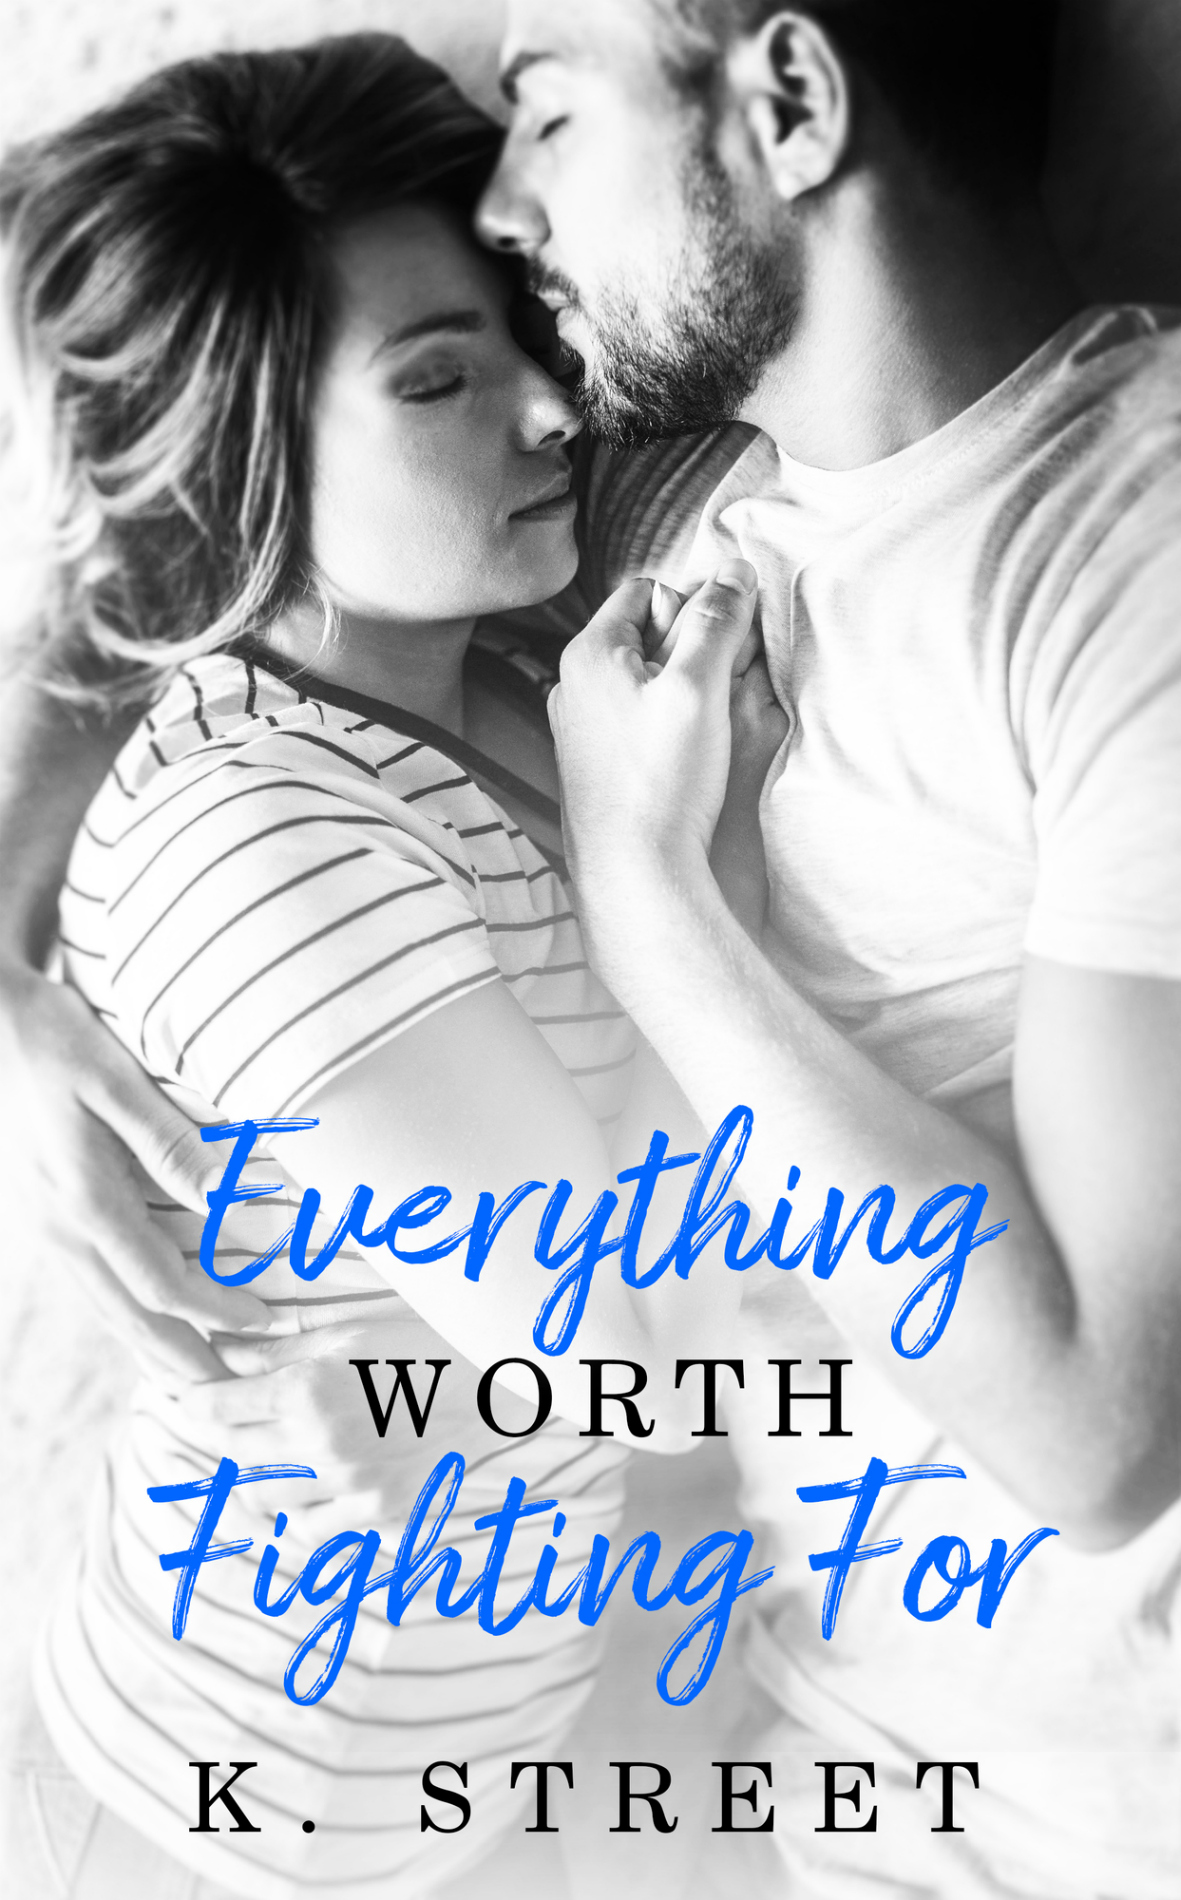 Everything Worth Fighting For by K. Street [Review]